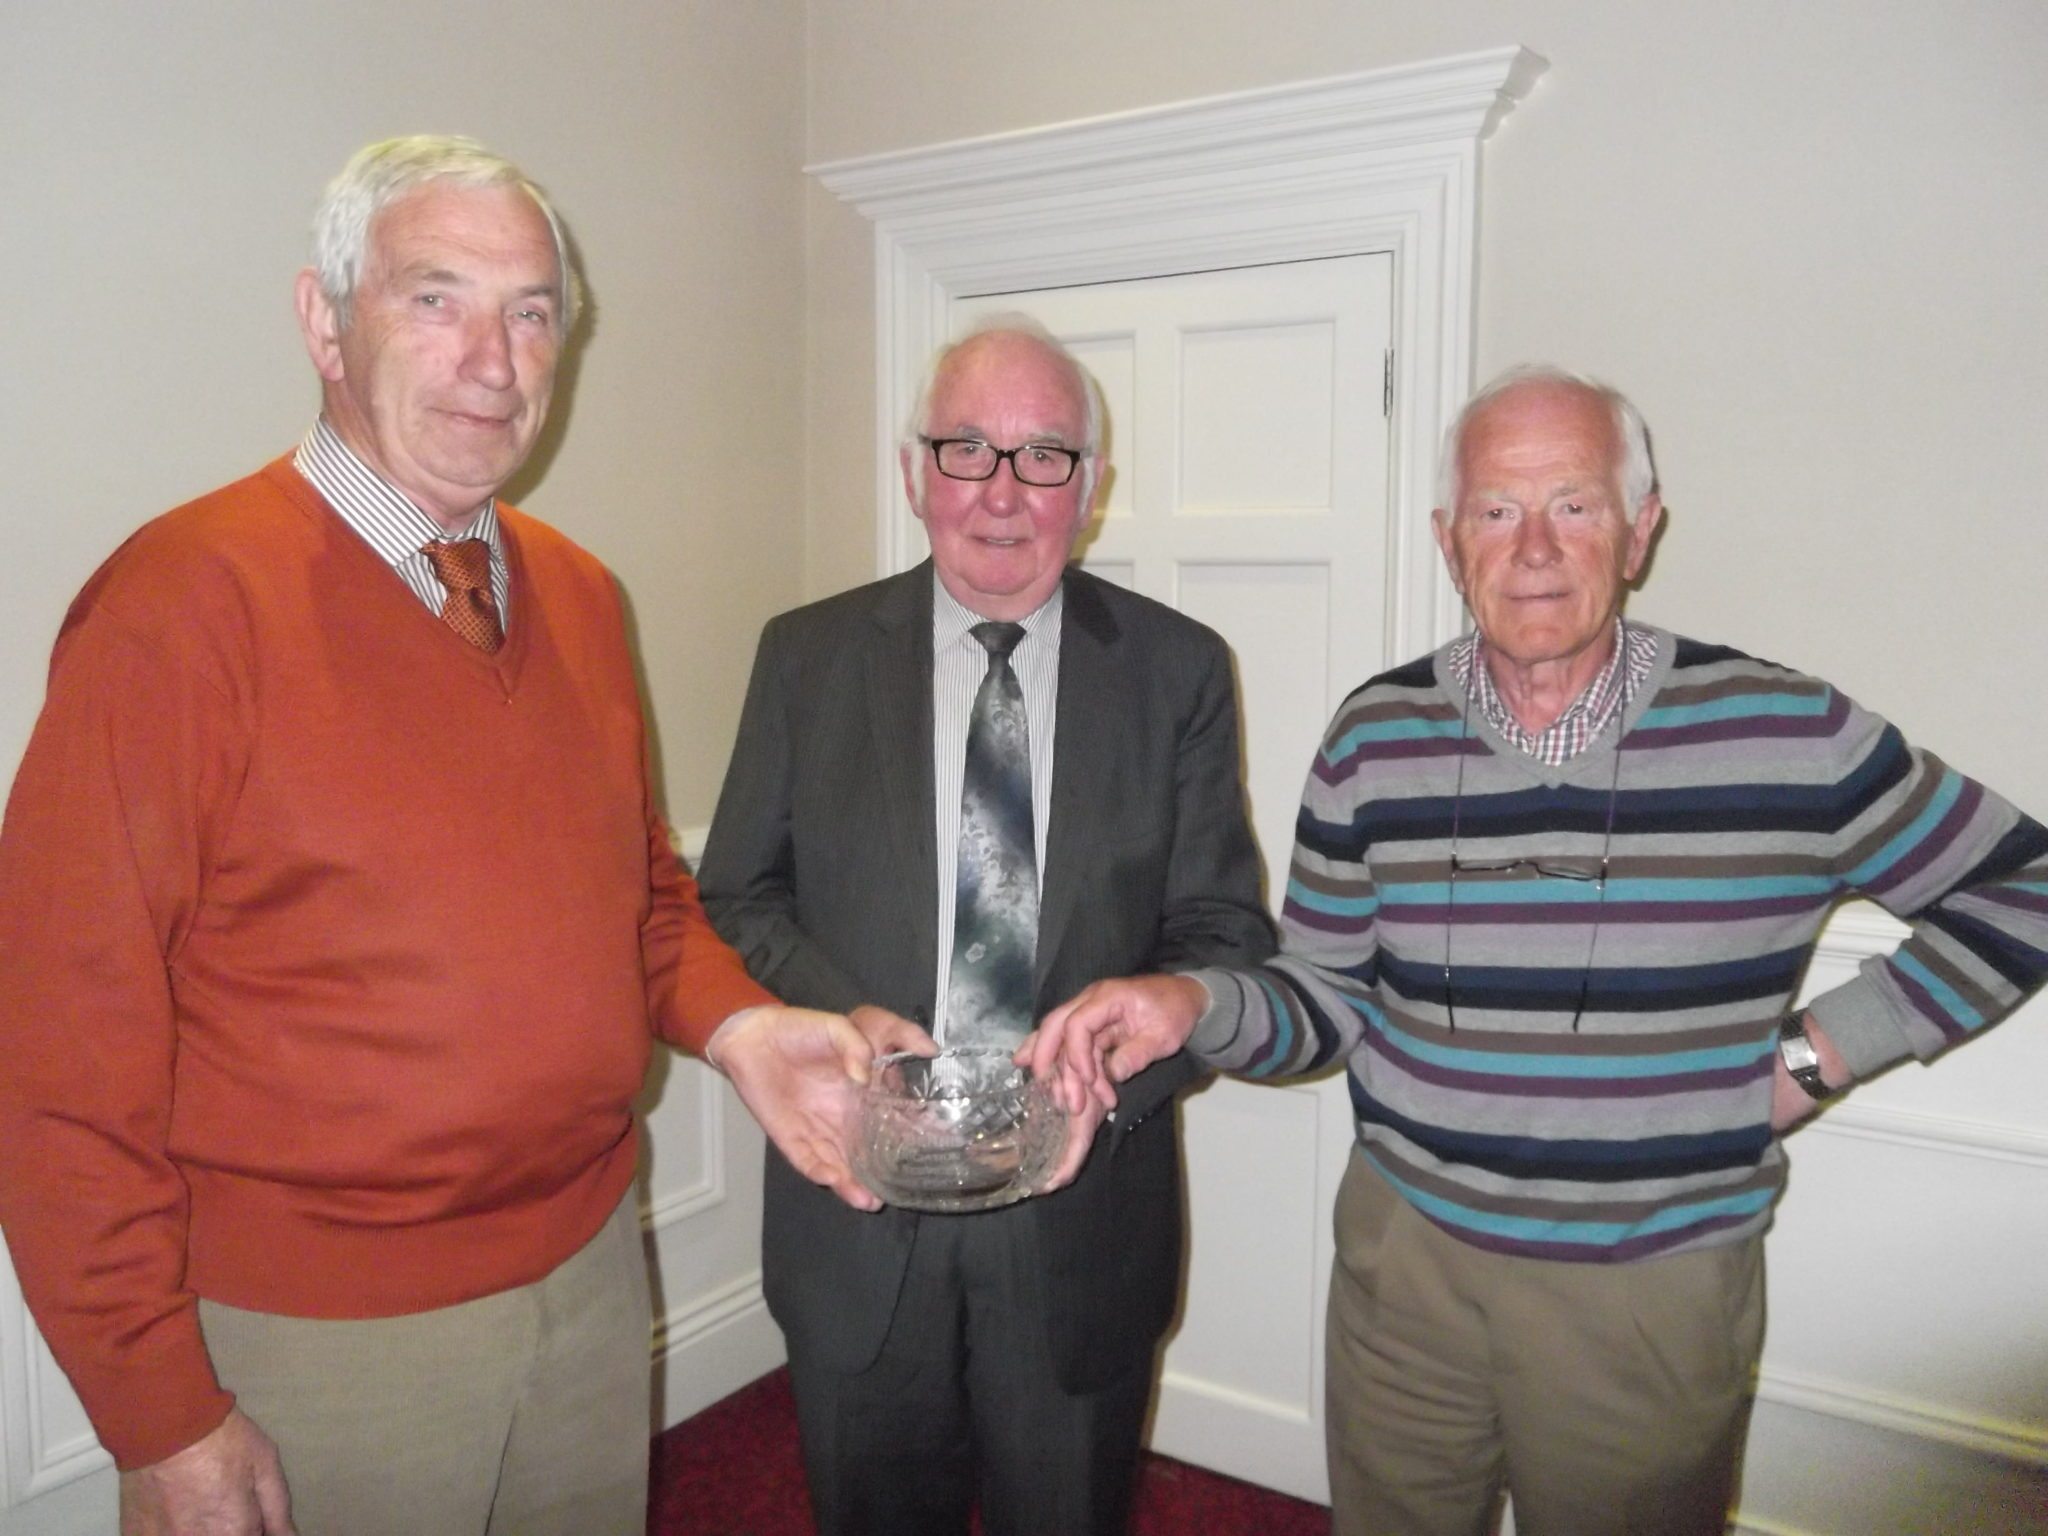 Mike Nash with Oliver Mann makes a retirement presentation to Gerry Bennis, Servicing Officer for Limerick Post Primary GAA, as thanks from Desmond College Newcastle West Co. Limerick